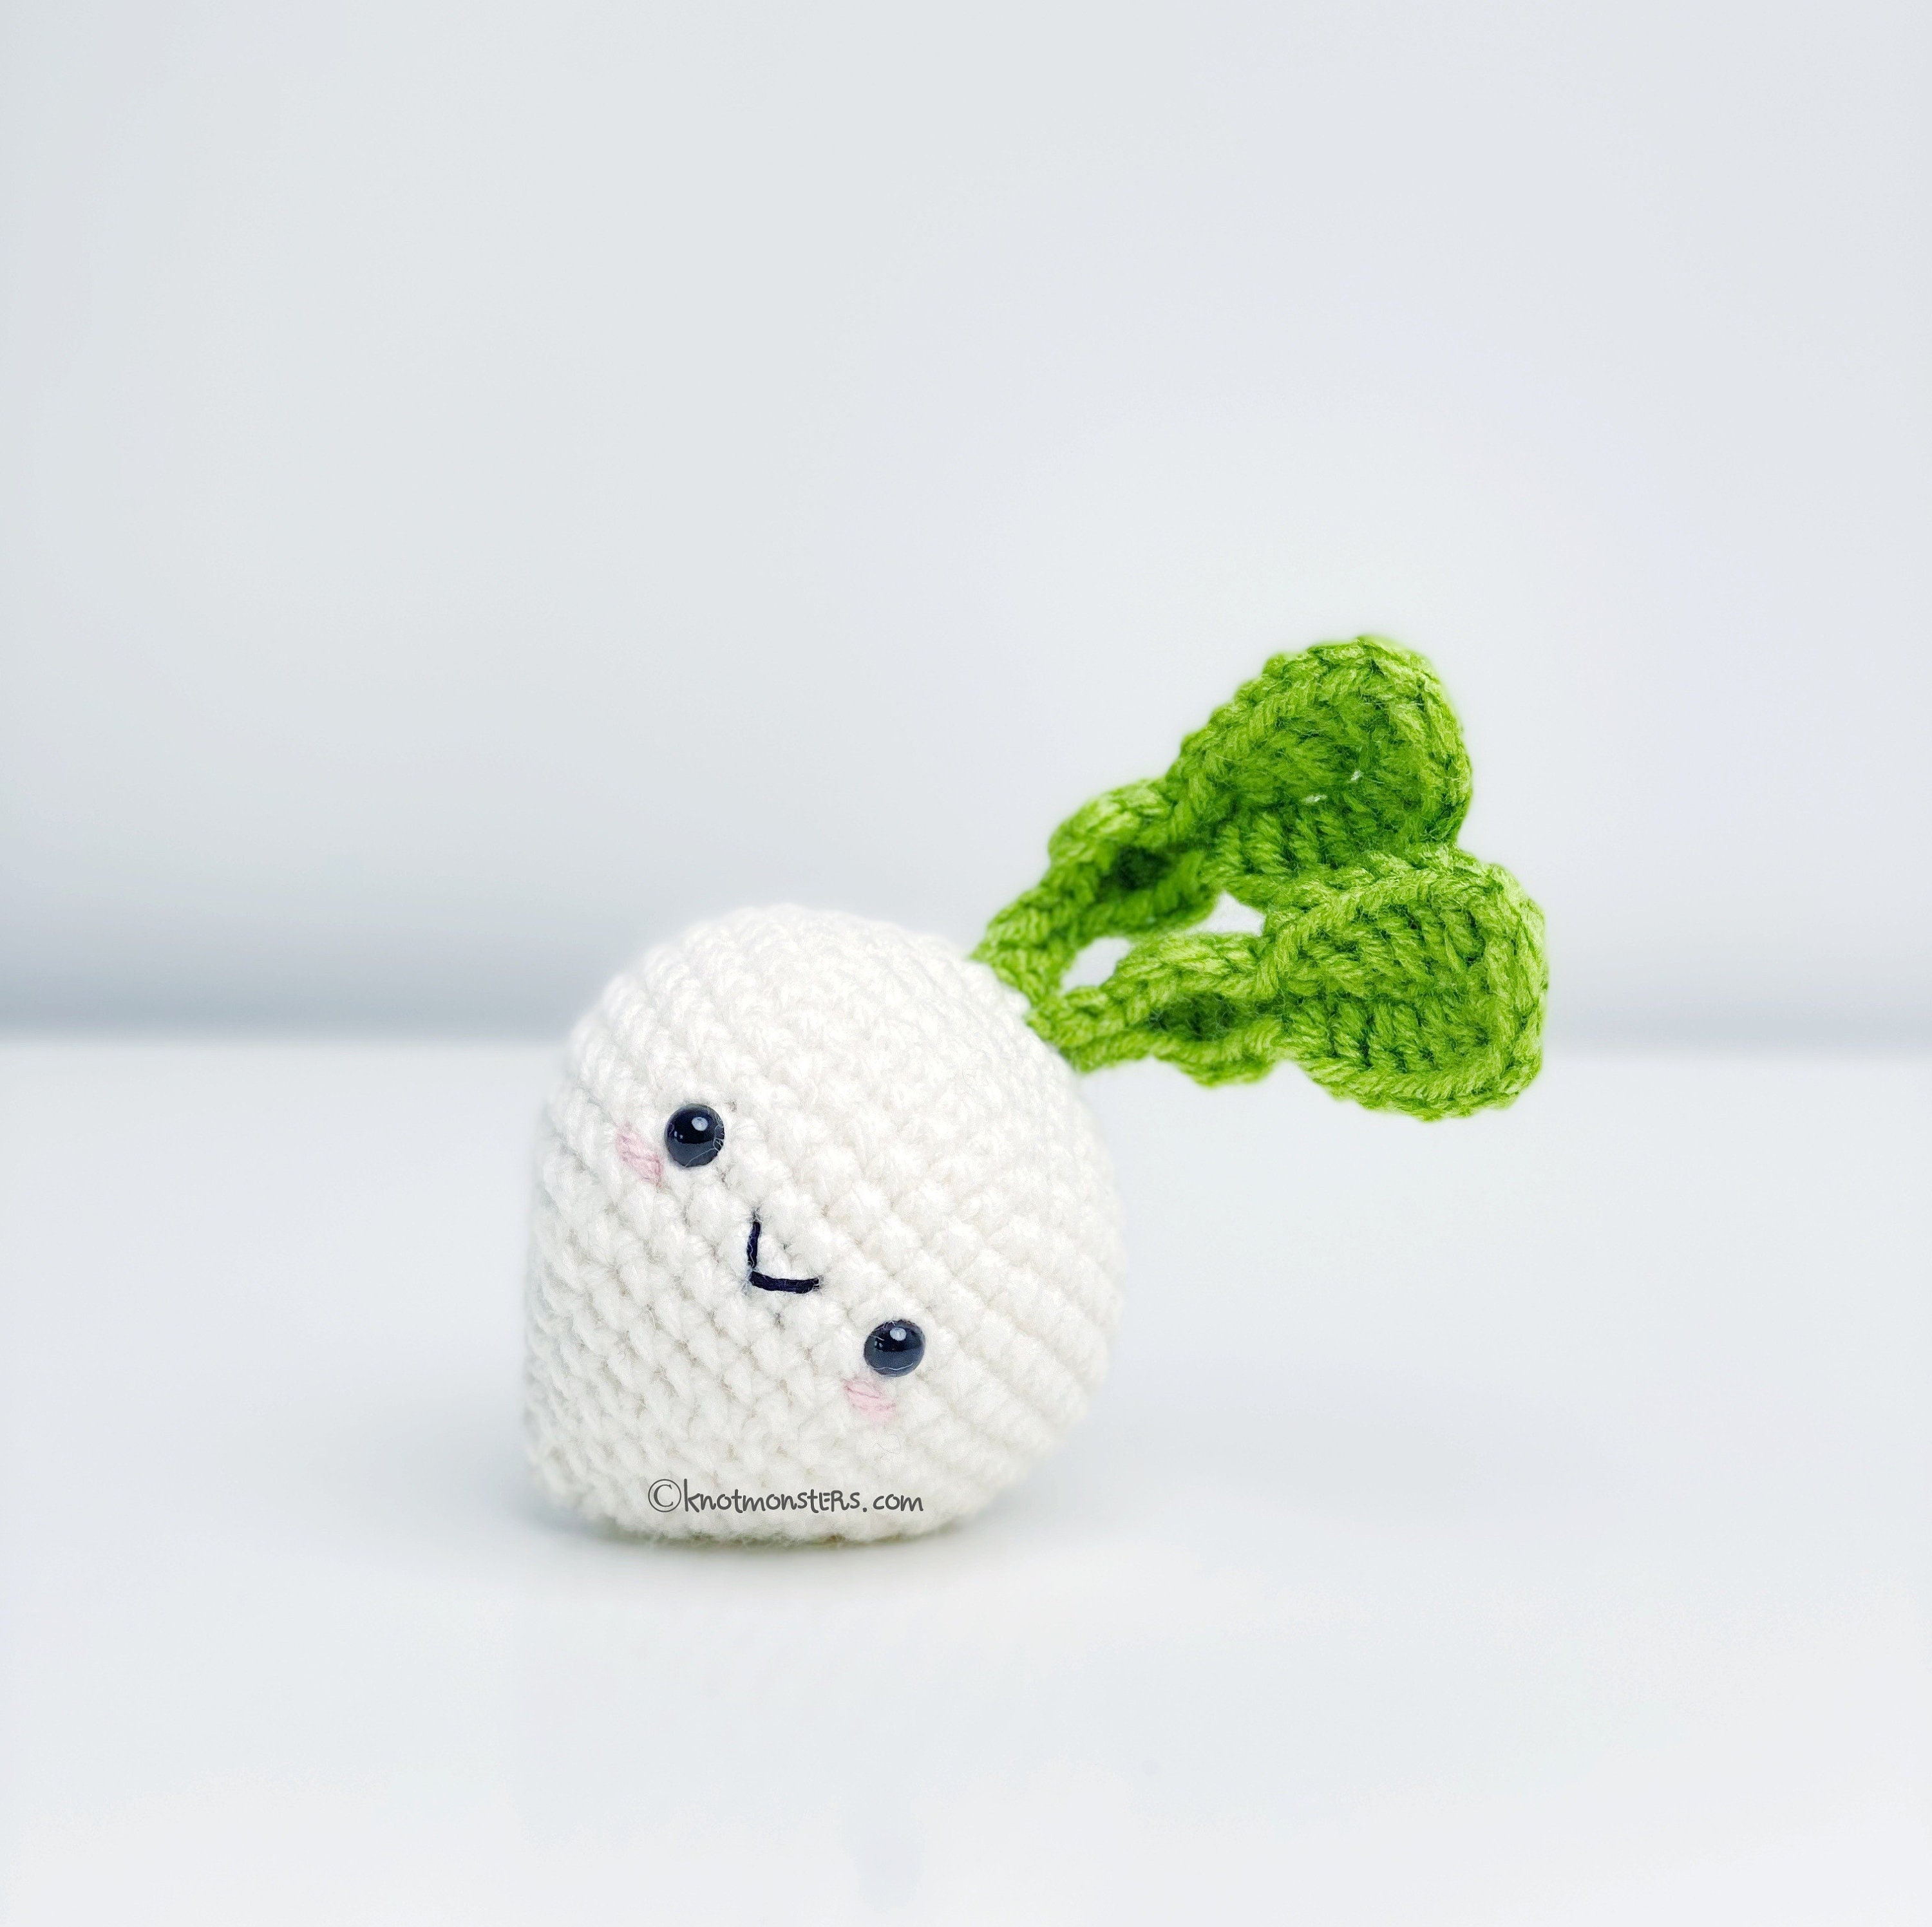 Crochet Emotional Support Pickle,caring Carrot With Positive